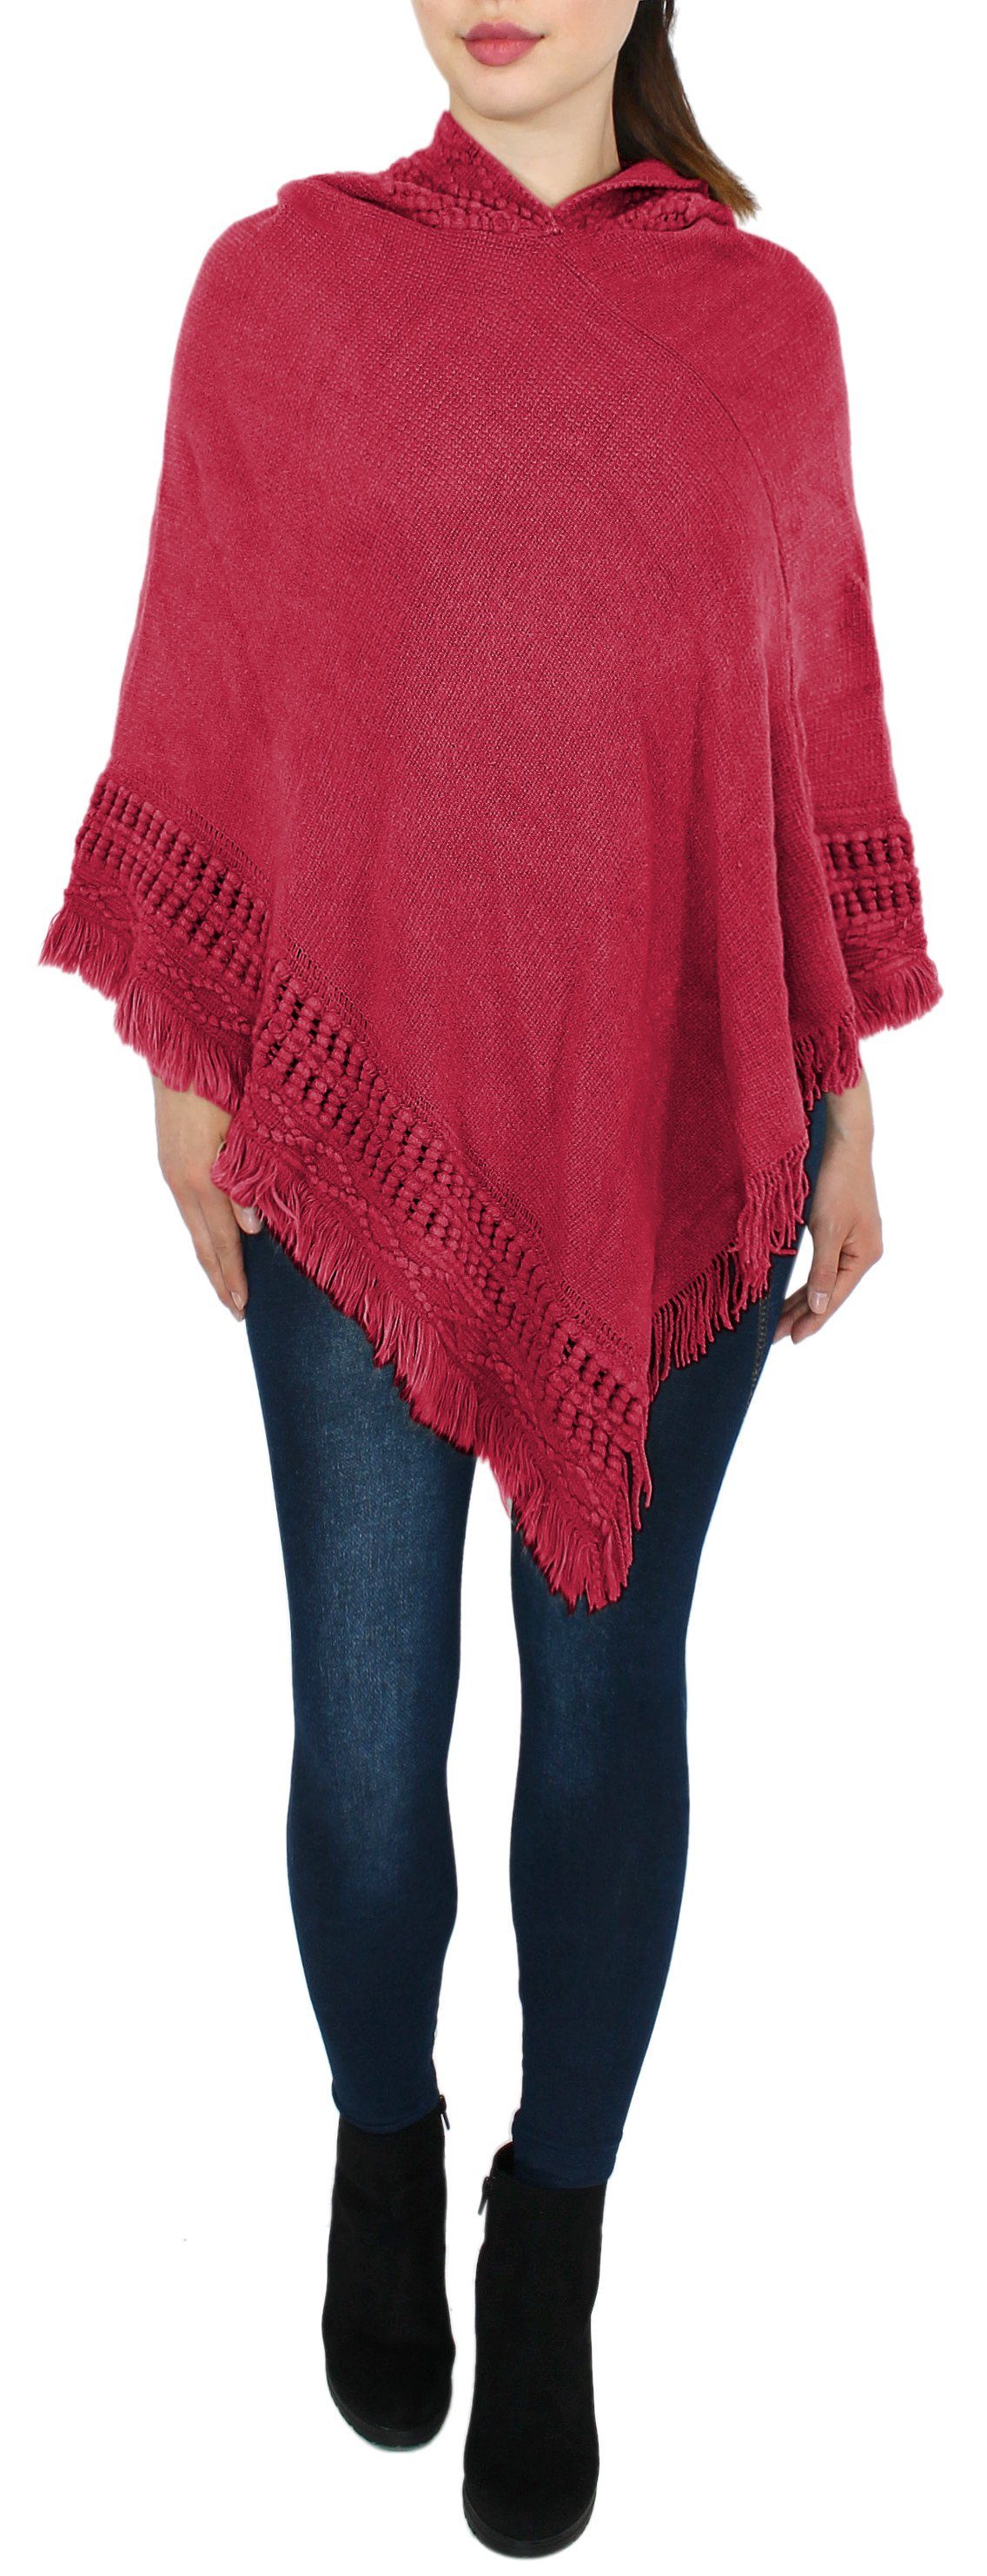 mit dy_mode Fransen mit Pullover Umhang Poncho Kapuze Damen Strickponcho Strickponcho Unifarbe, WJ076OS-Rot Cape in